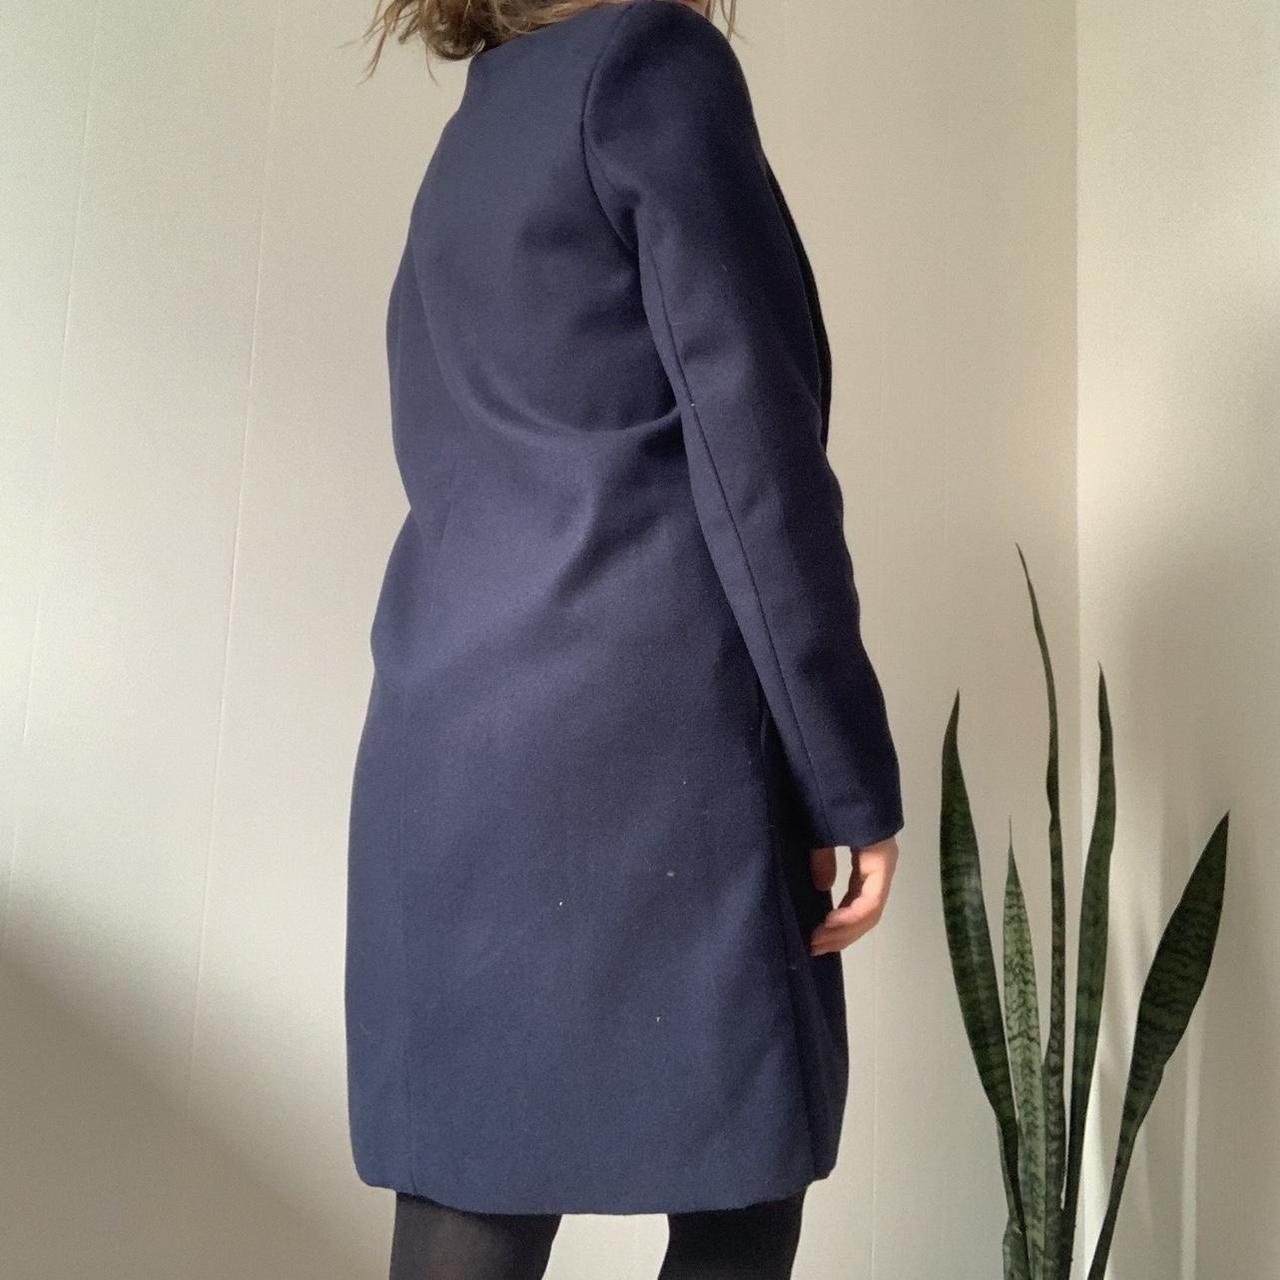 Women's Navy and Blue Jacket (4)